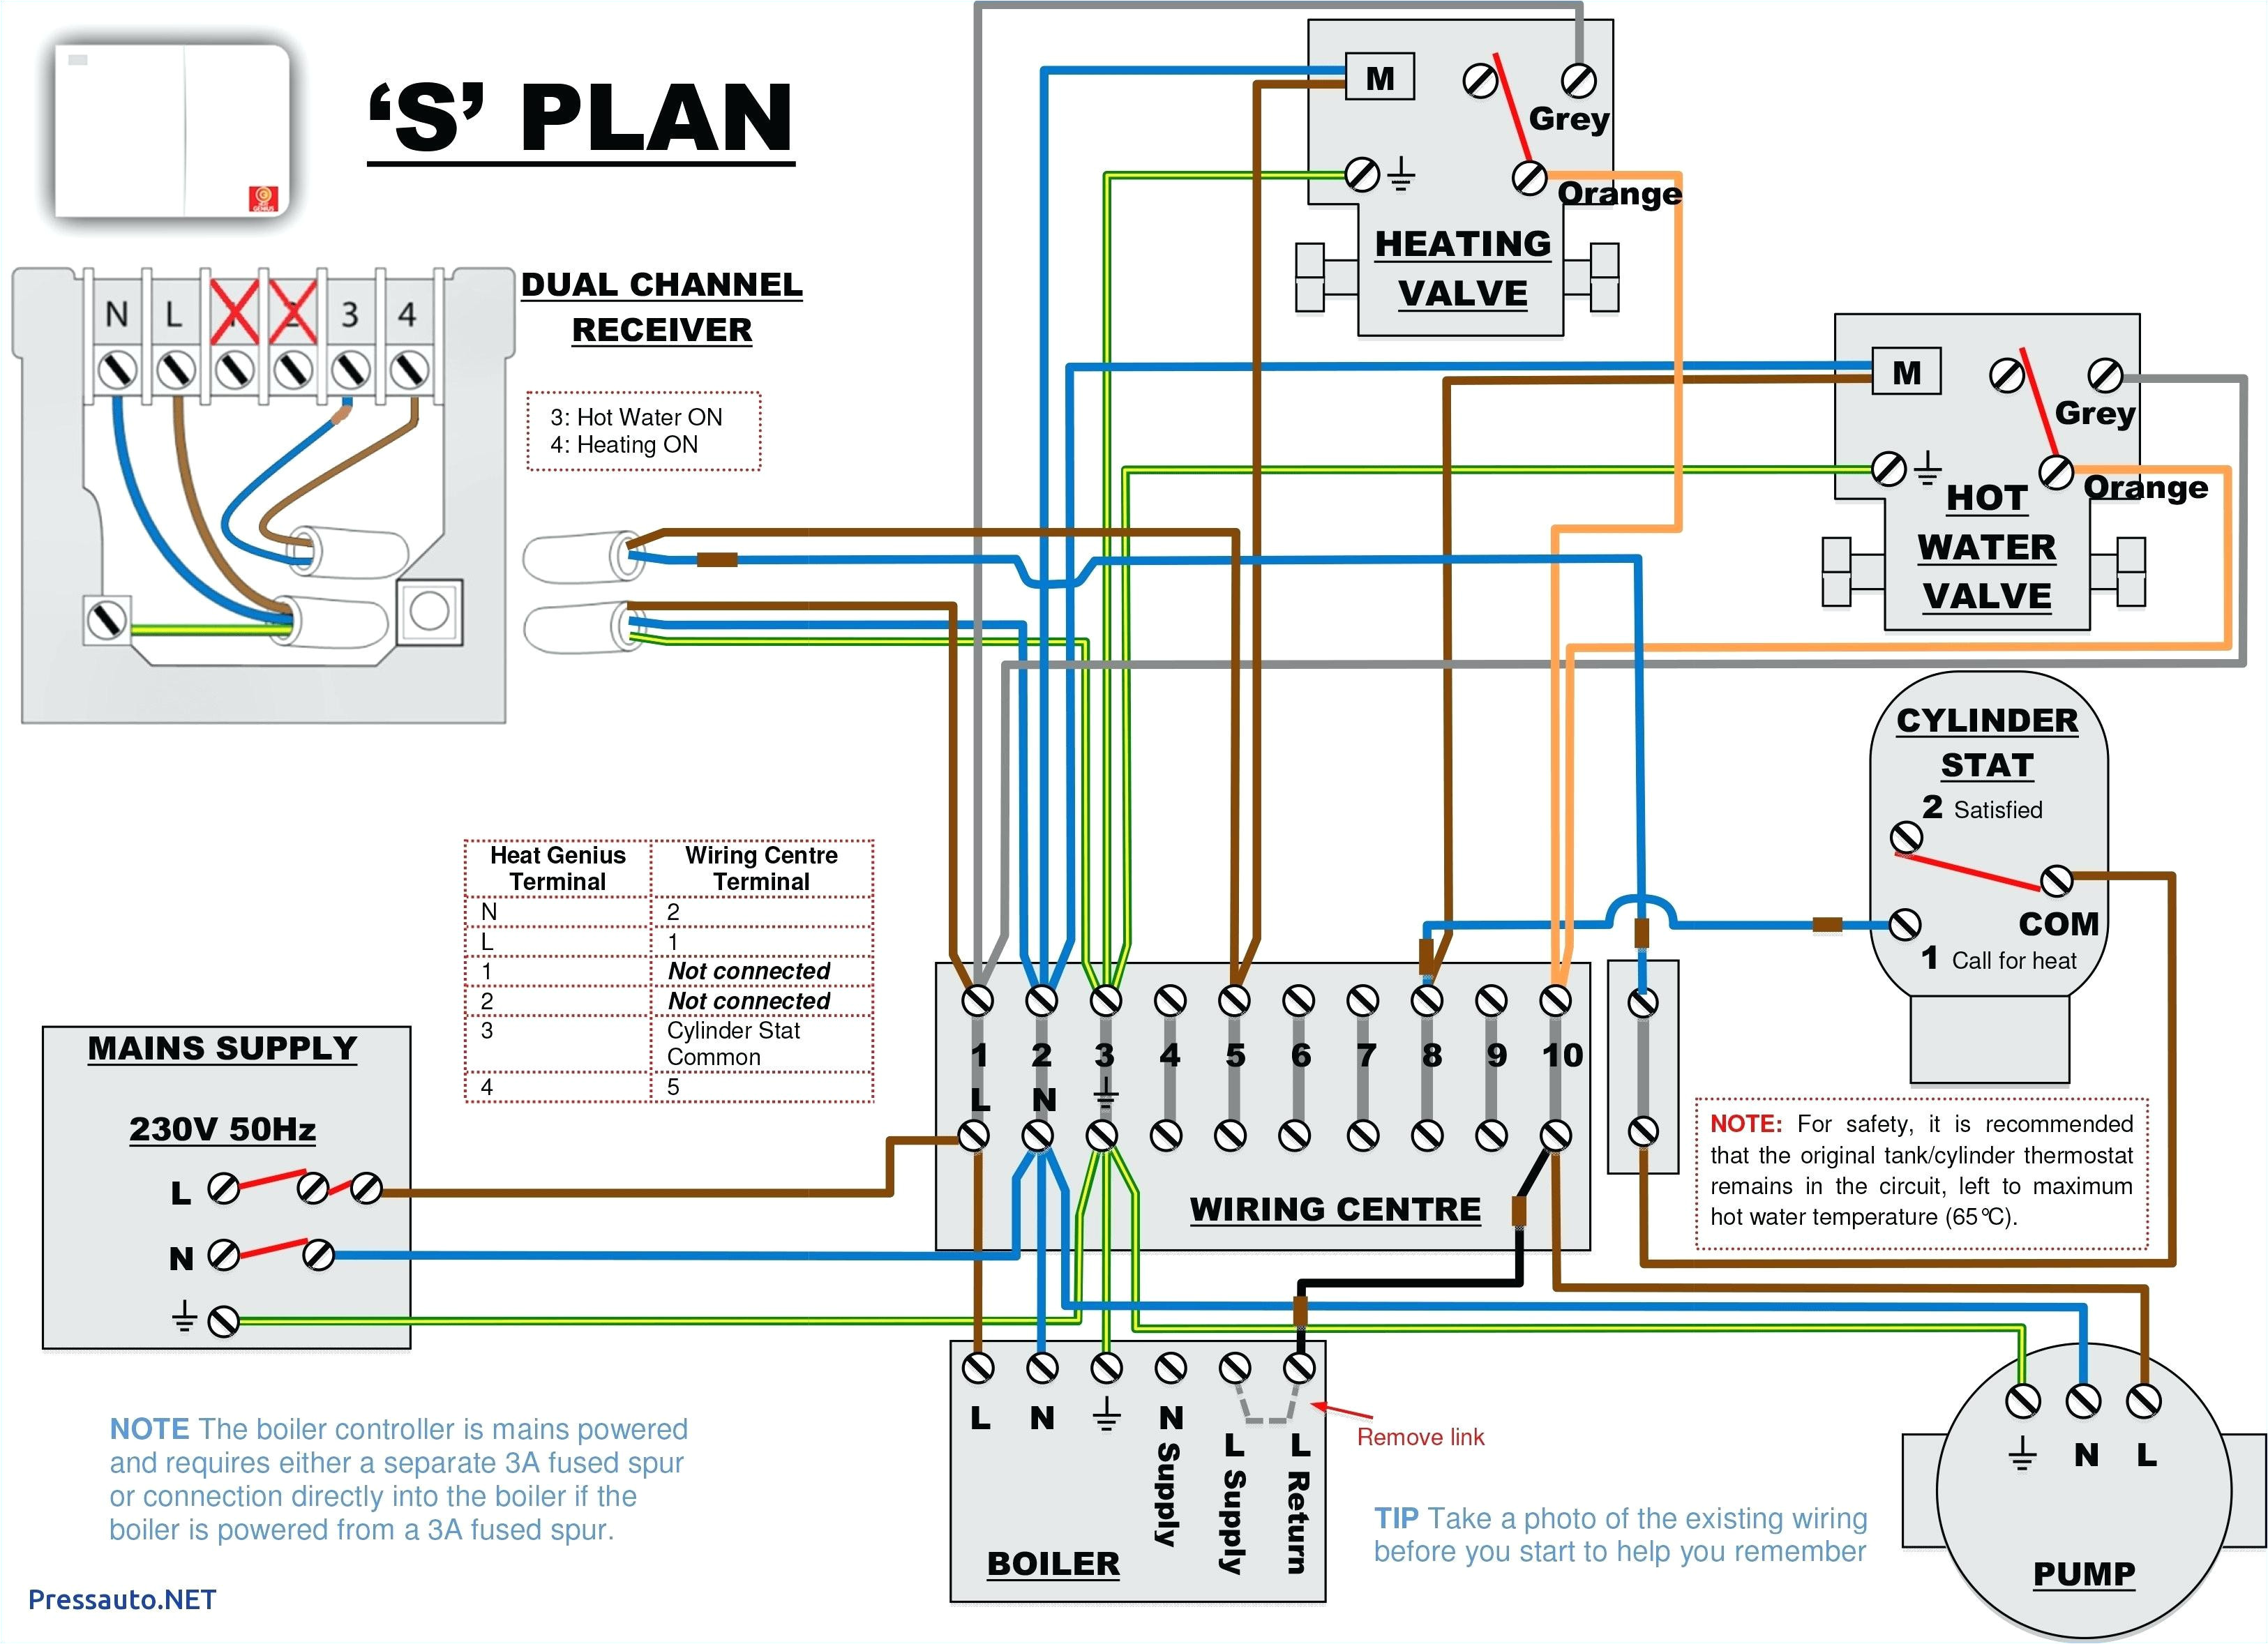 Central Air Thermostat Wiring Diagram from www.adinaporter.com